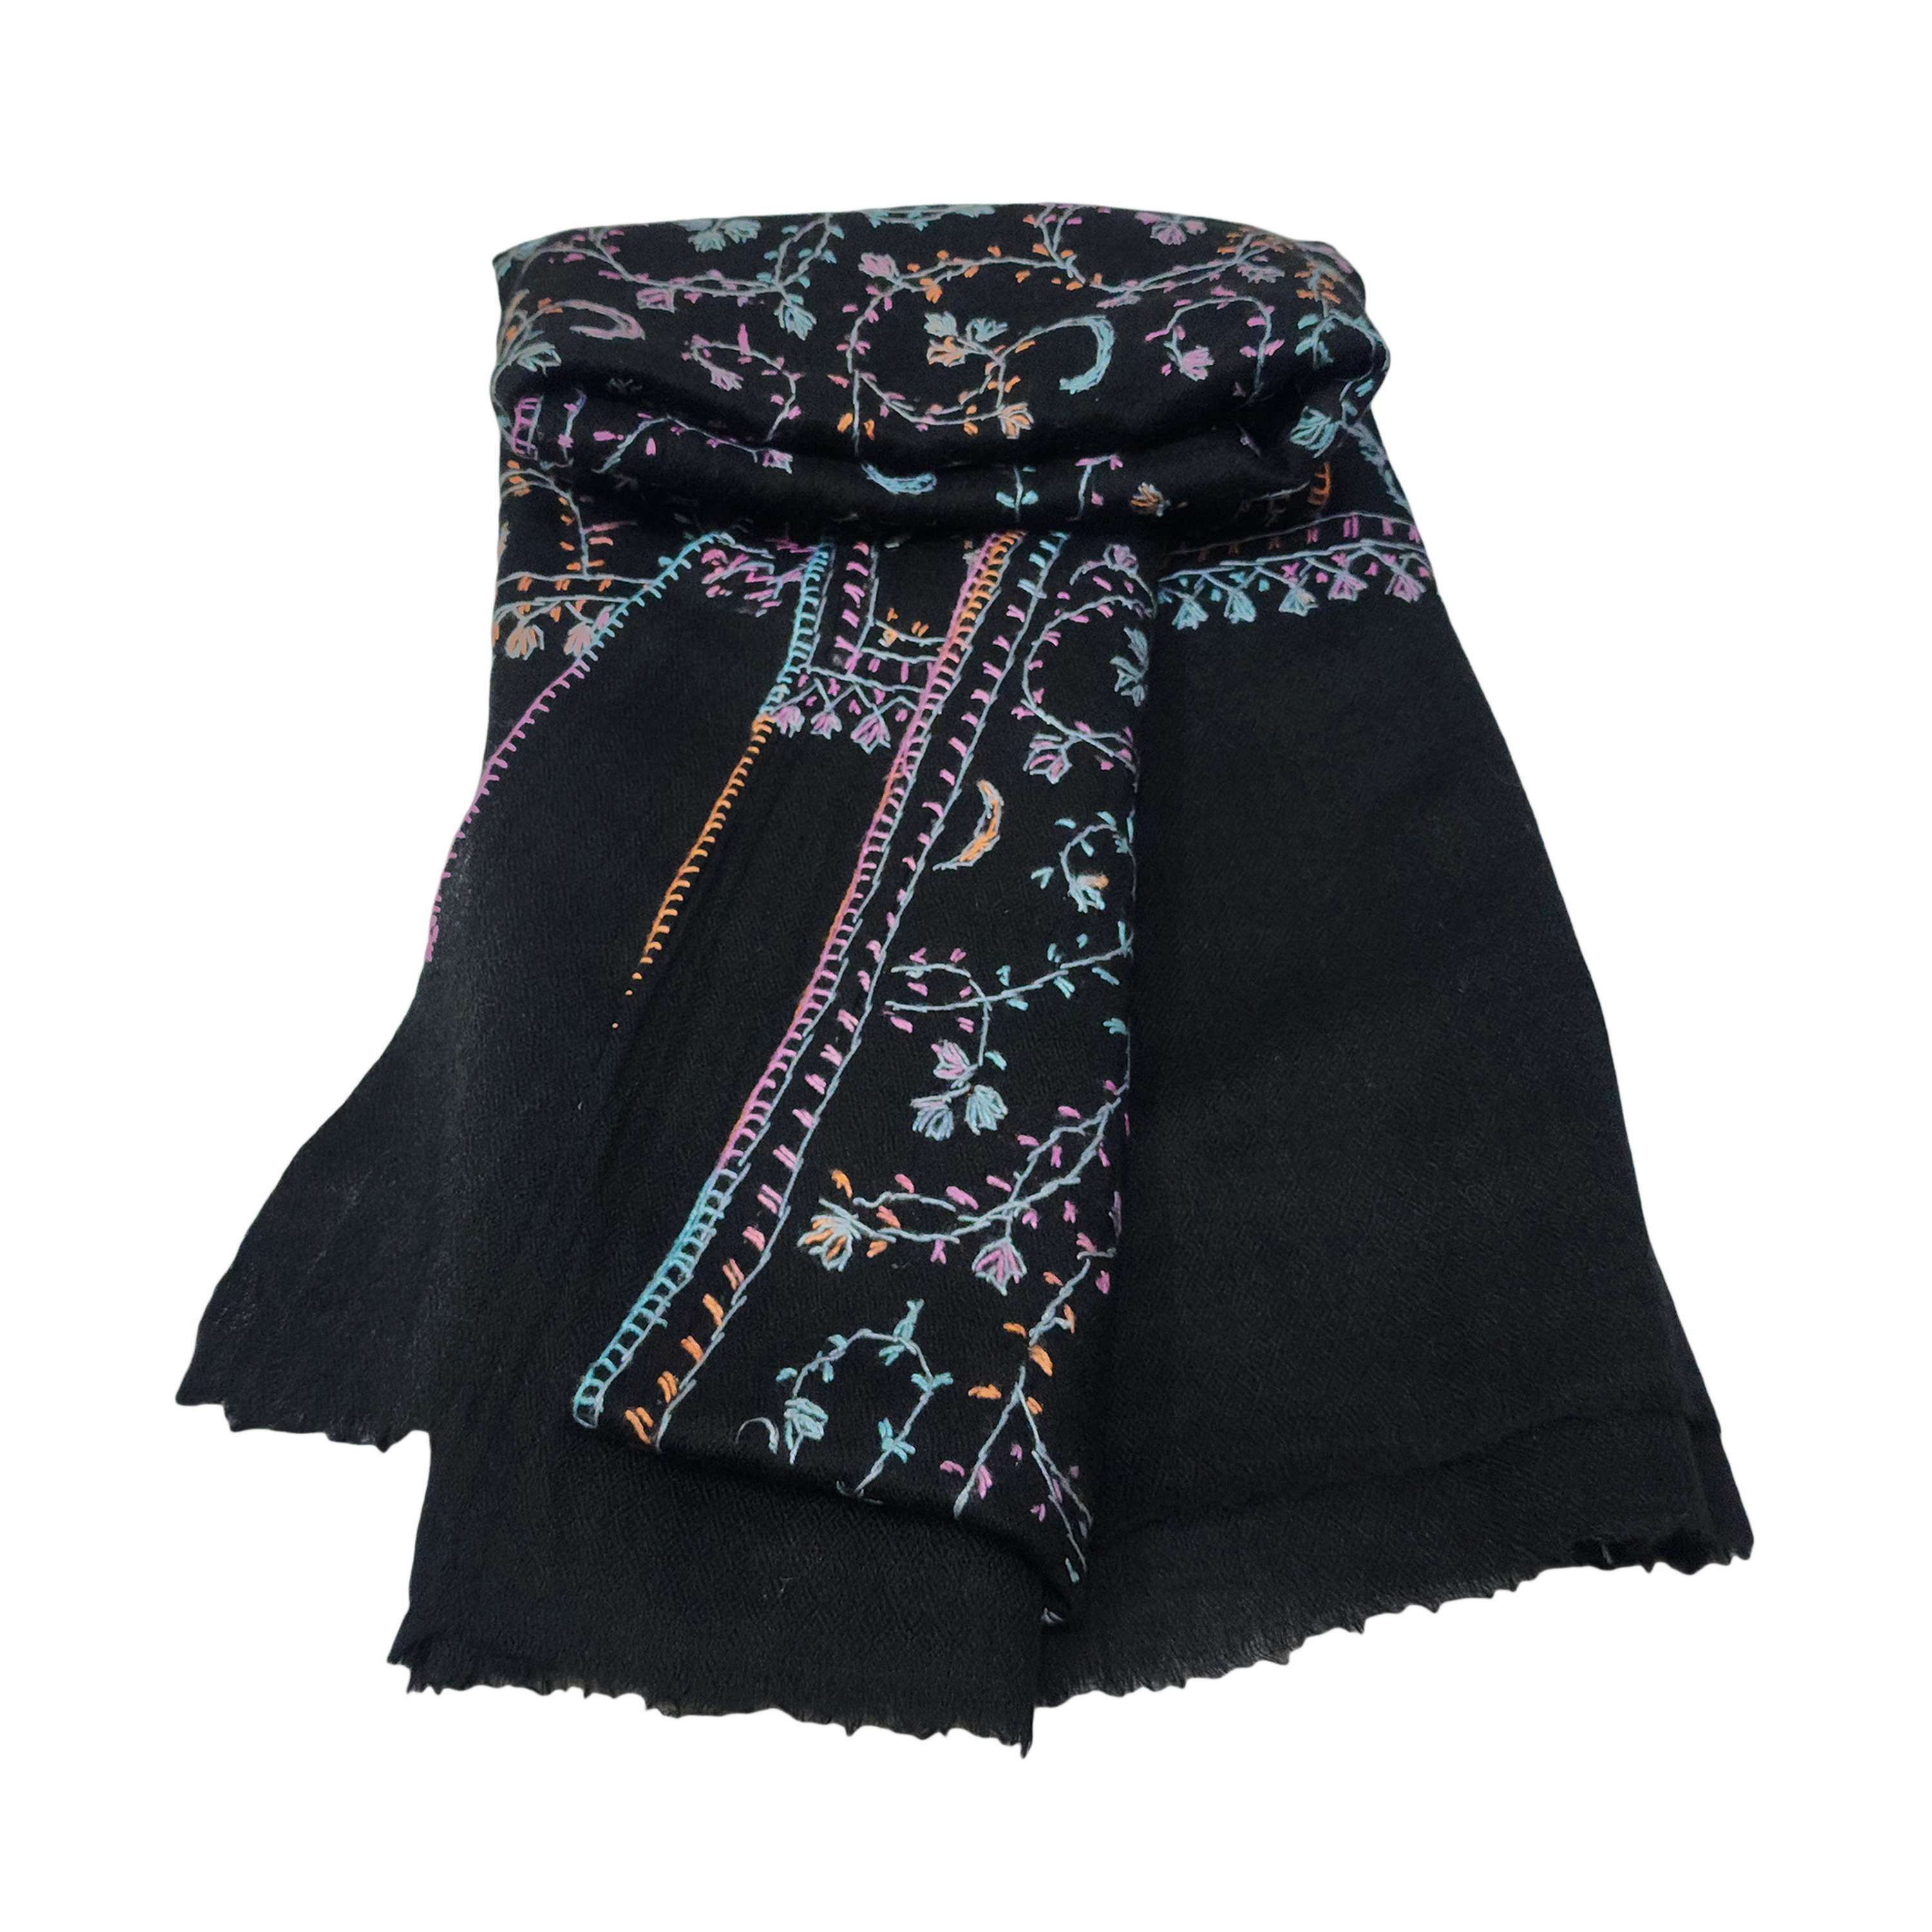 Ring Shawl, A Thin, Soft, And Light Shawl For All-weather Use, Two-ply Wool, With Detailed Embroidery